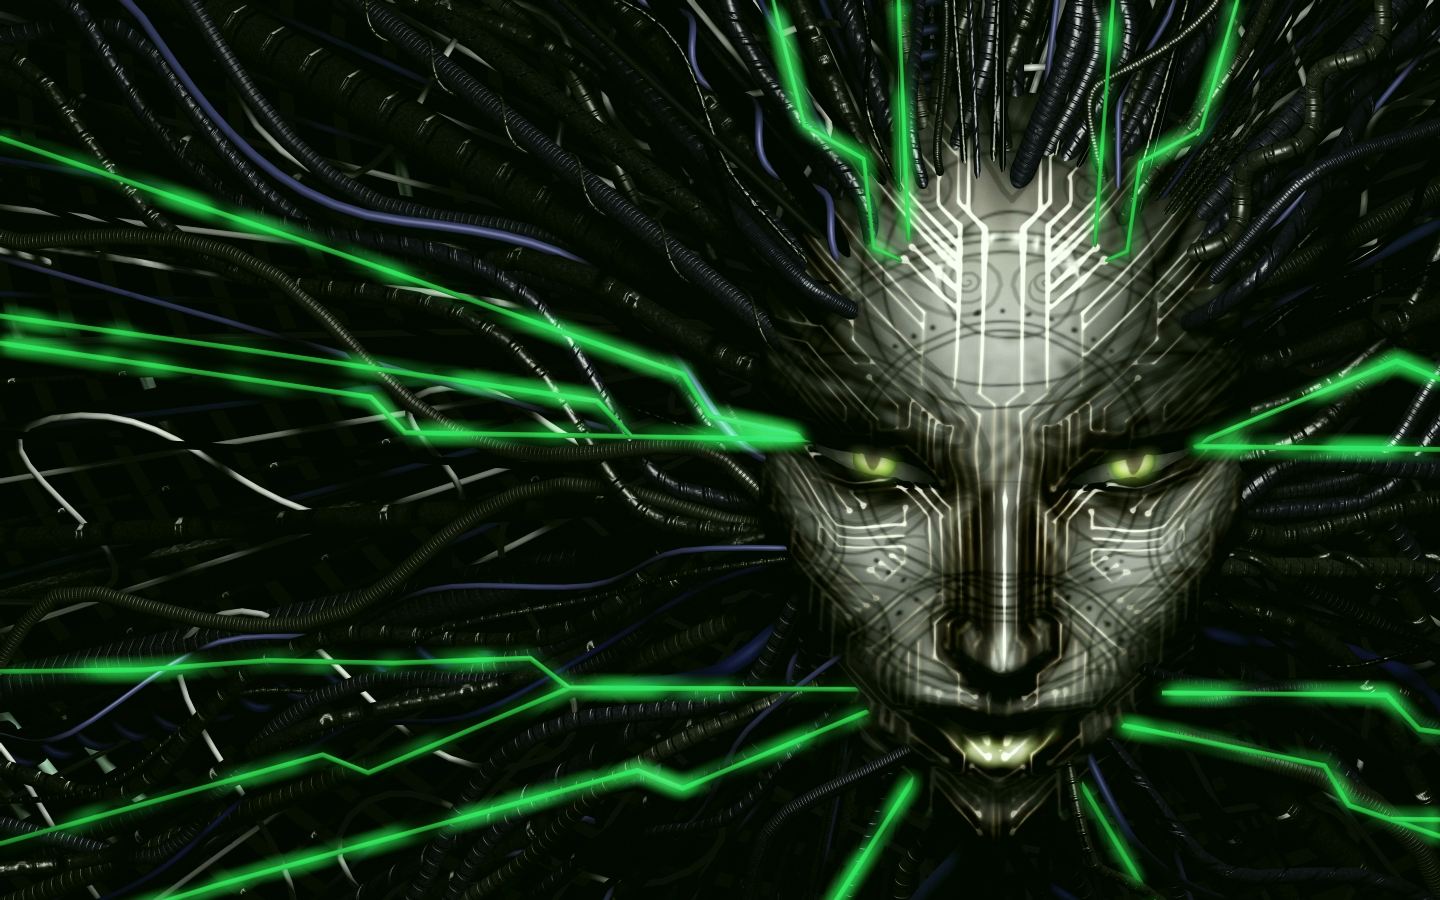 system shock 2 hd texture mod